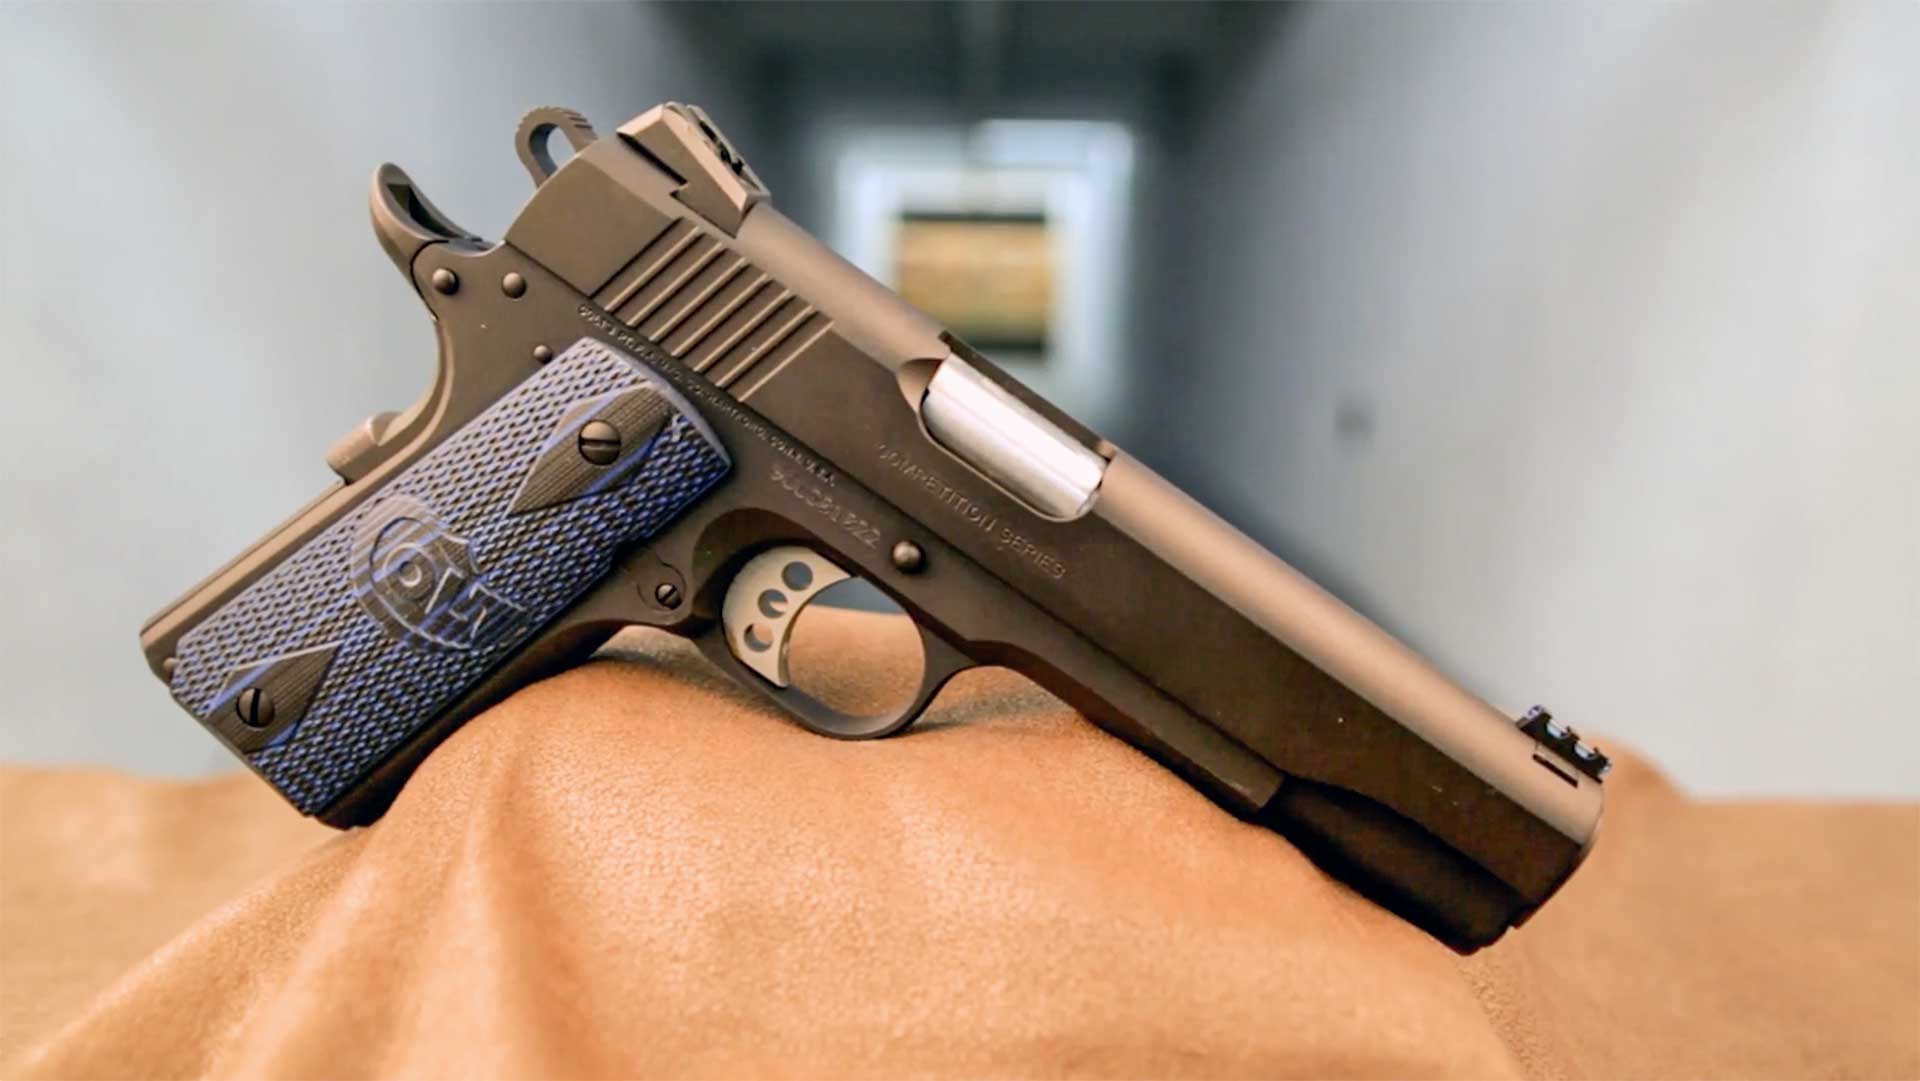 Making Today's Colt M1911  An Official Journal Of The NRA